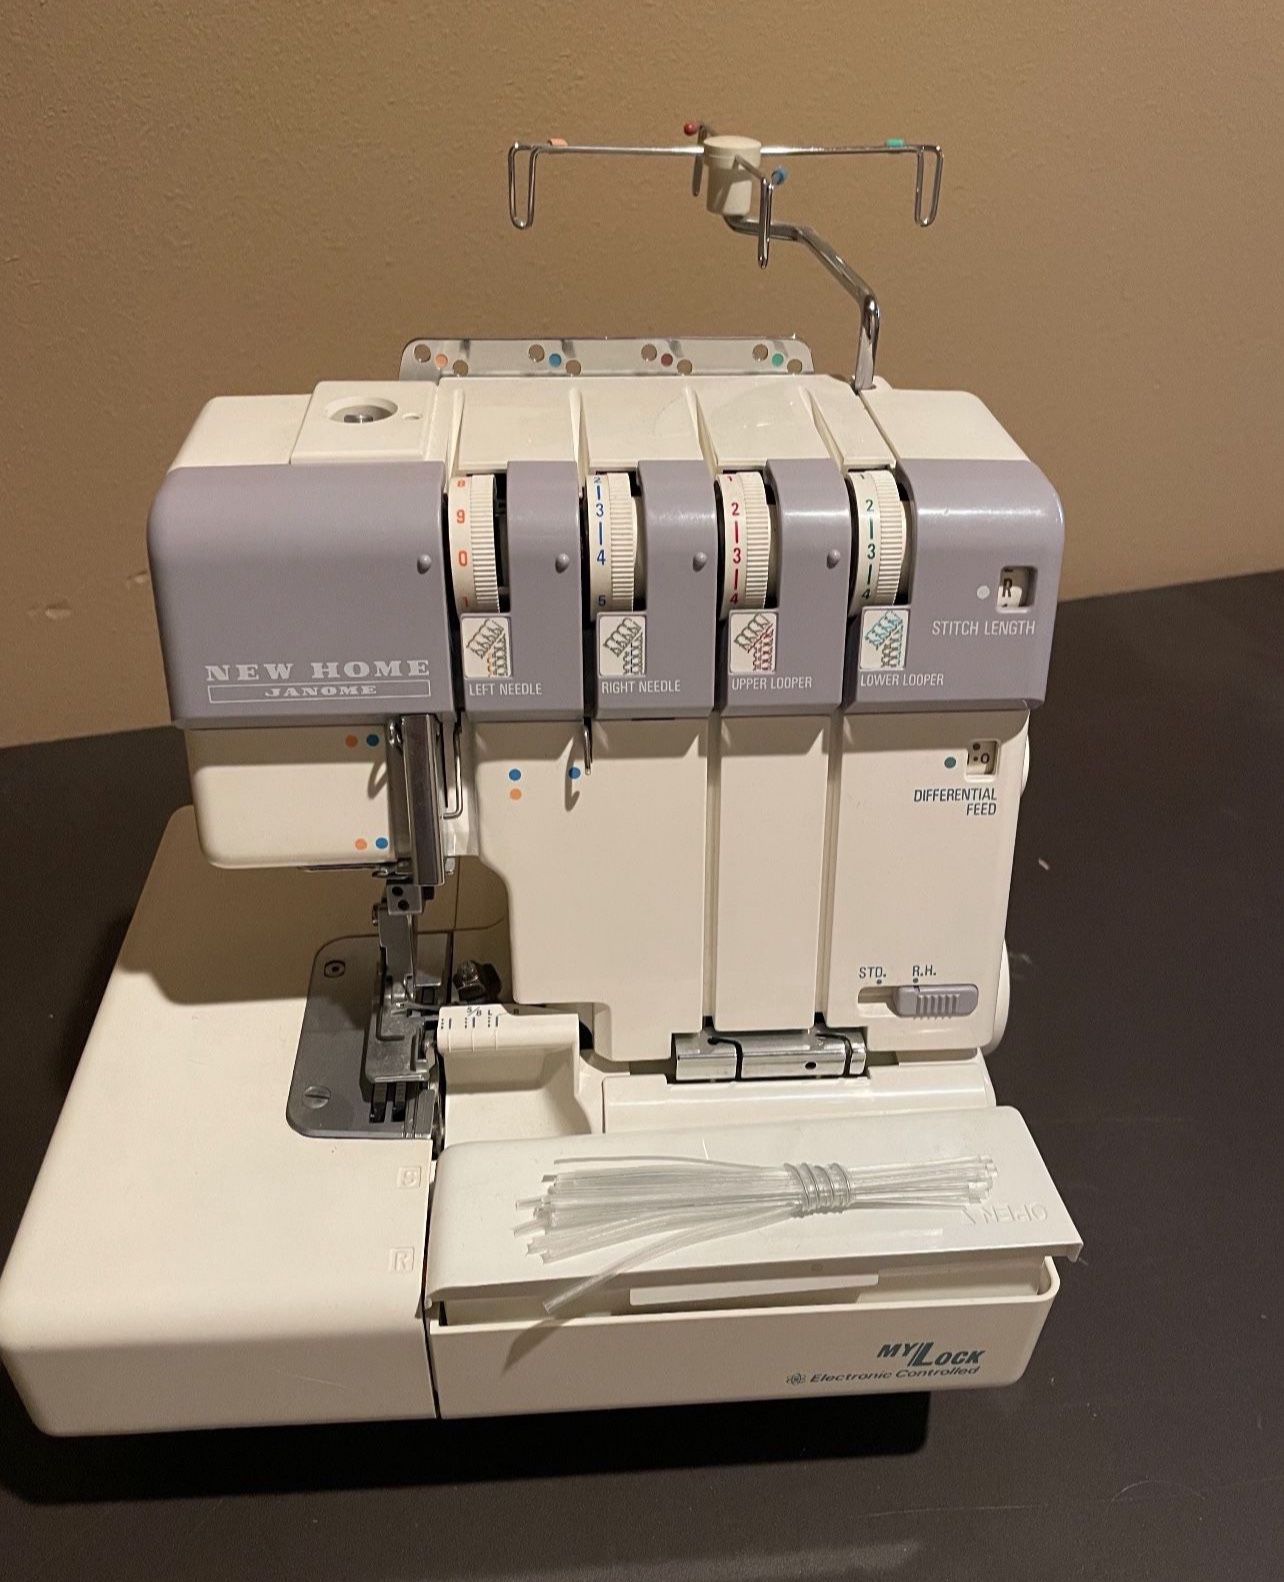 Like New Home 634D Serger.